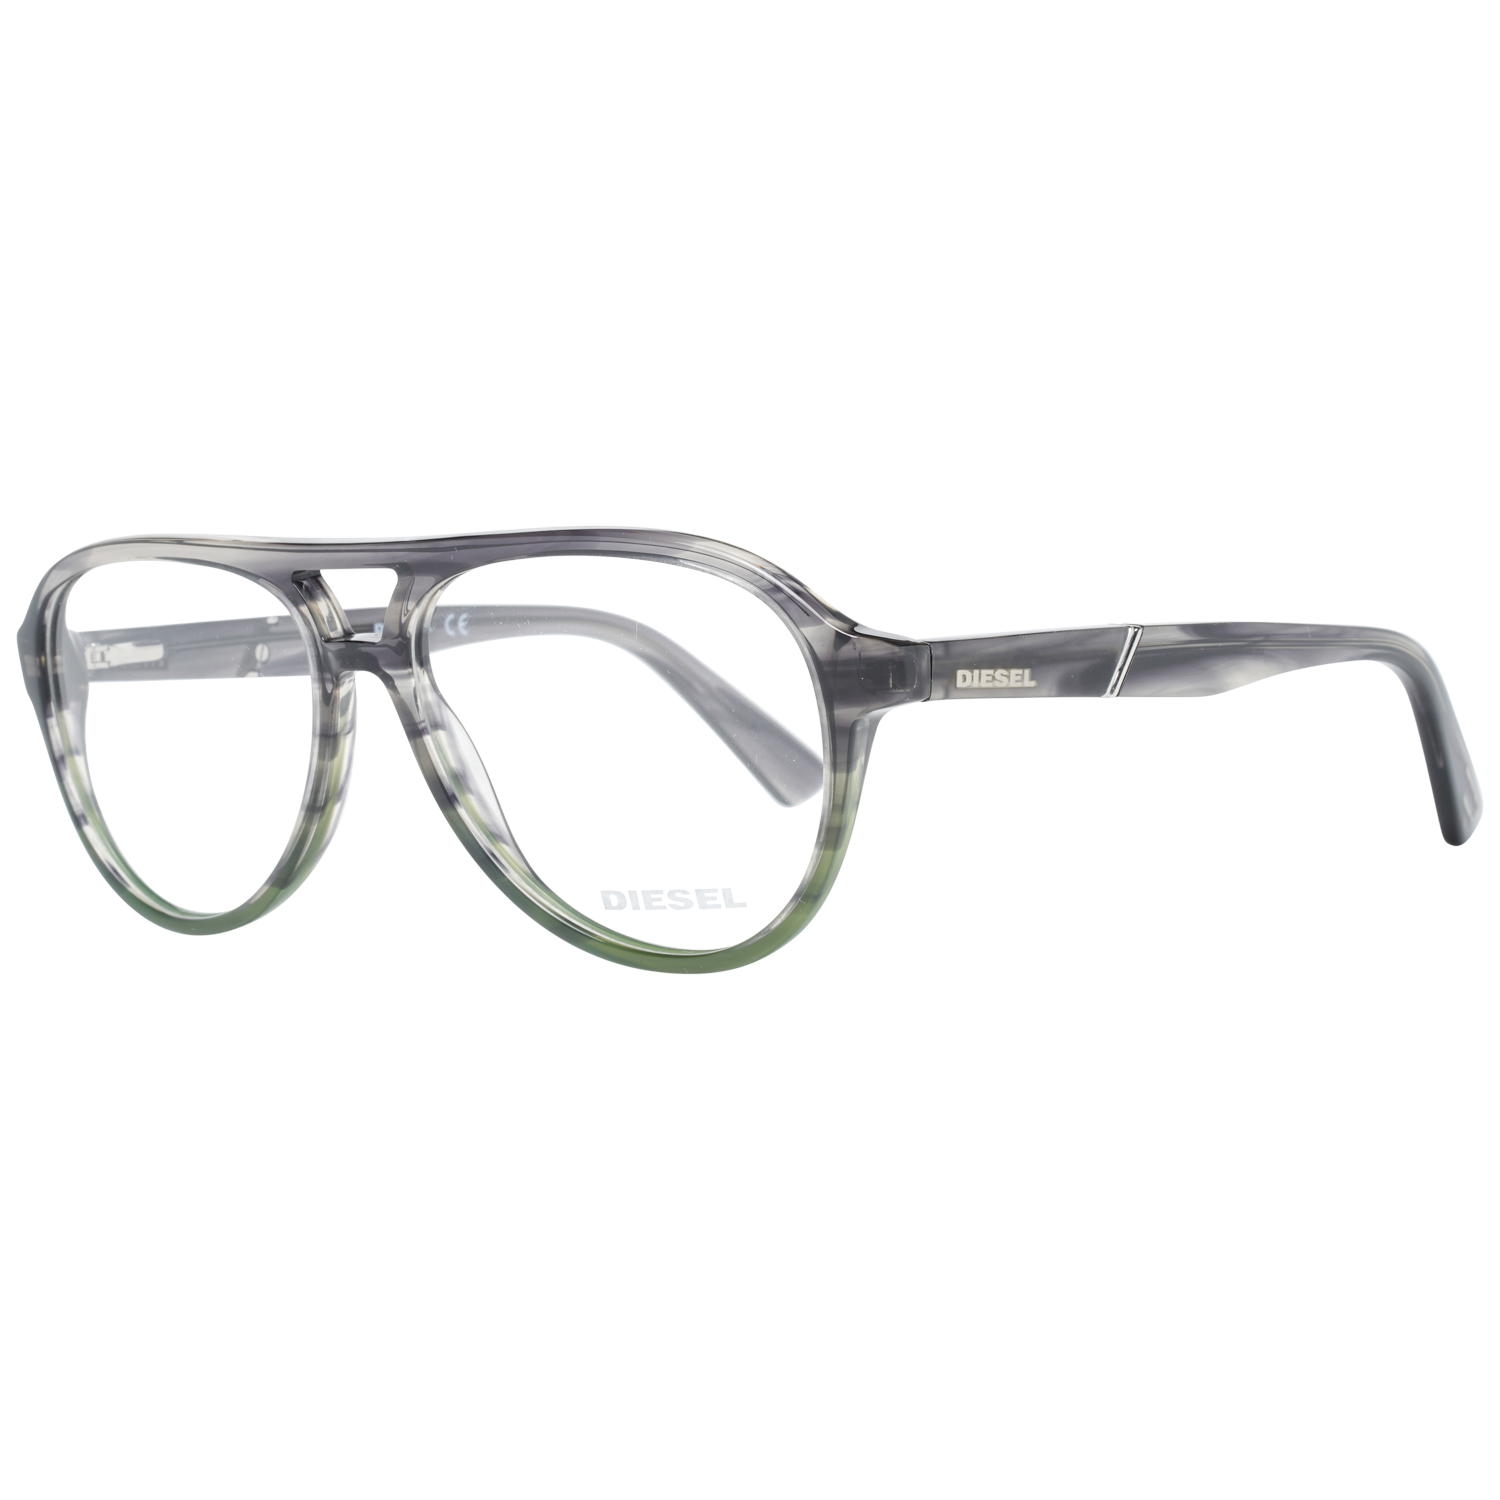 GenderMenMain colorGreyFrame colorGreyFrame materialPlasticSize54-14-145Lenses width54mmLenses heigth44mmBridge length14mmFrame width140mmTemple length145mmShipment includesCase, Cleaning clothStyleFull-RimSpring hingeYesExtraNo extra